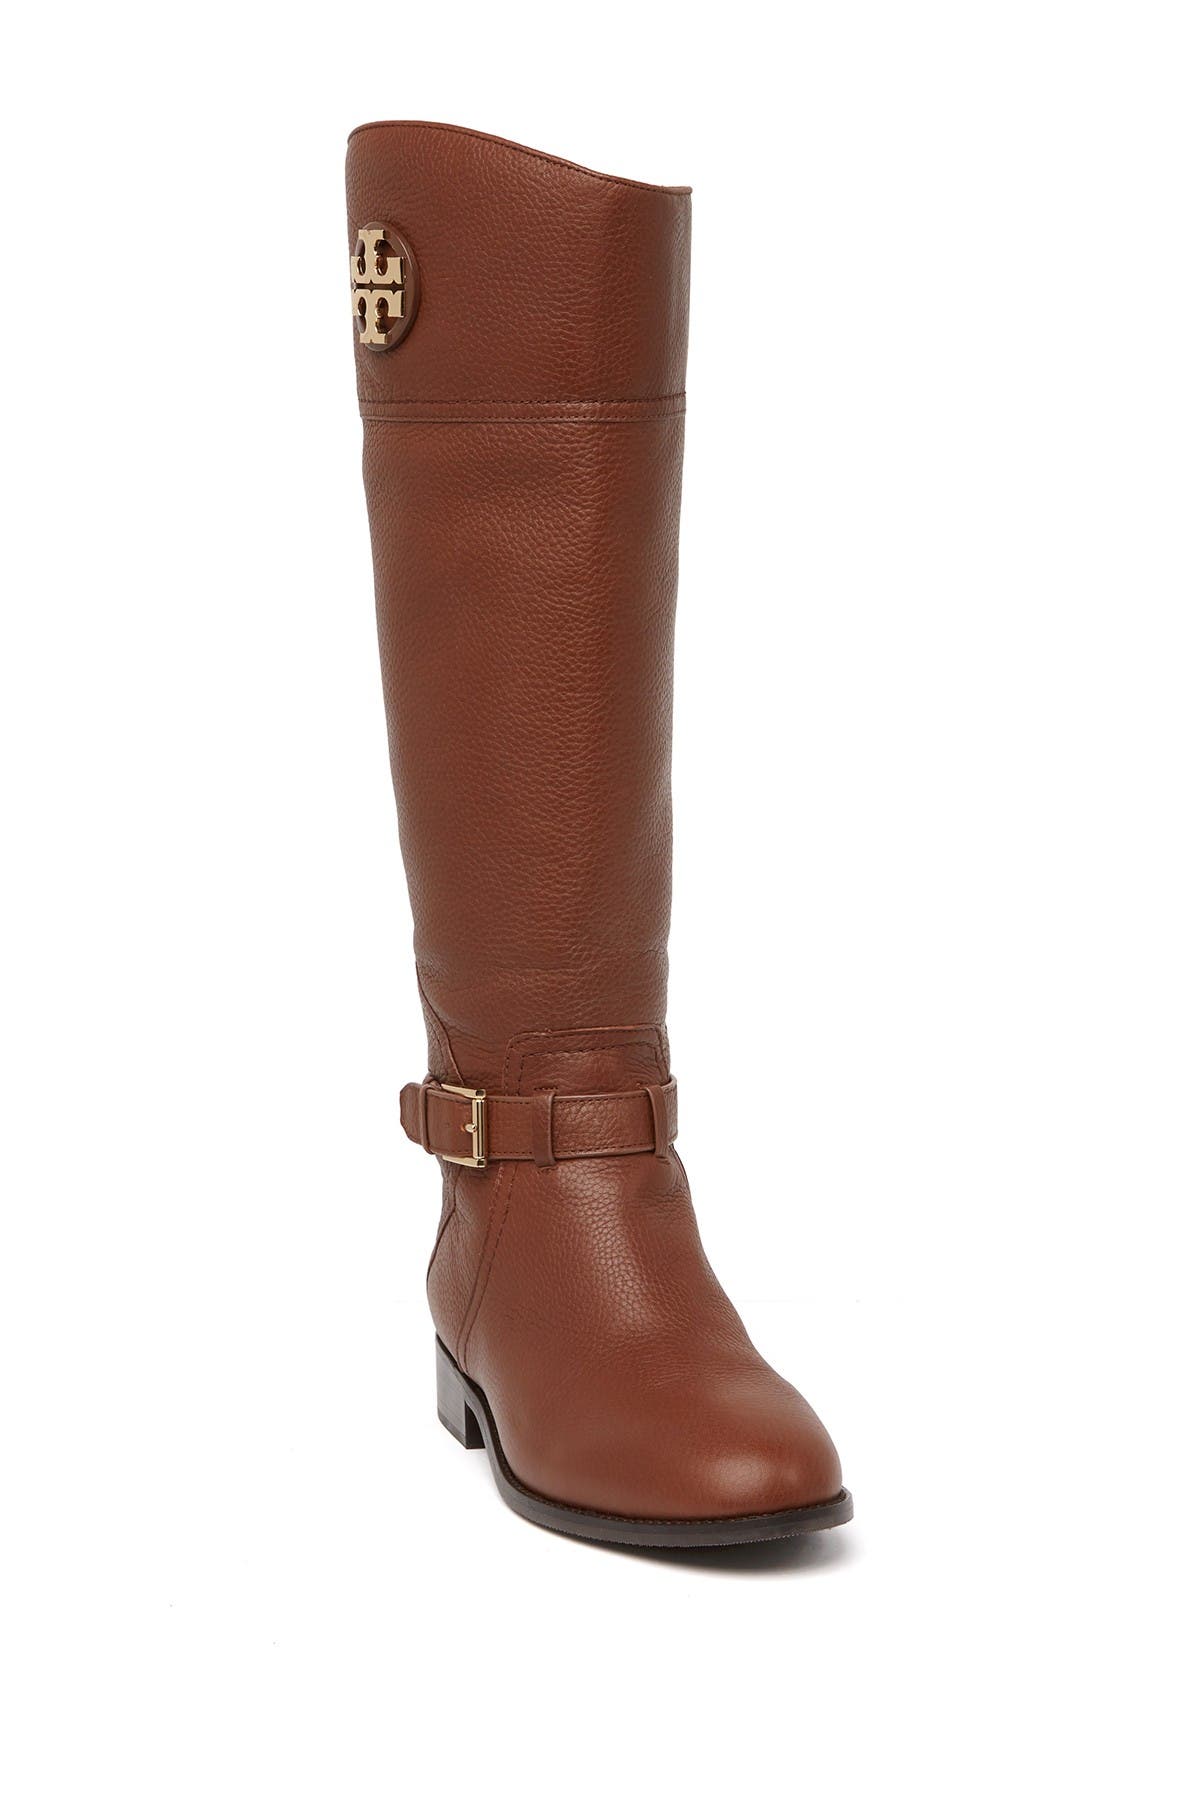 Adeline Tumbled Leather Riding Boot 